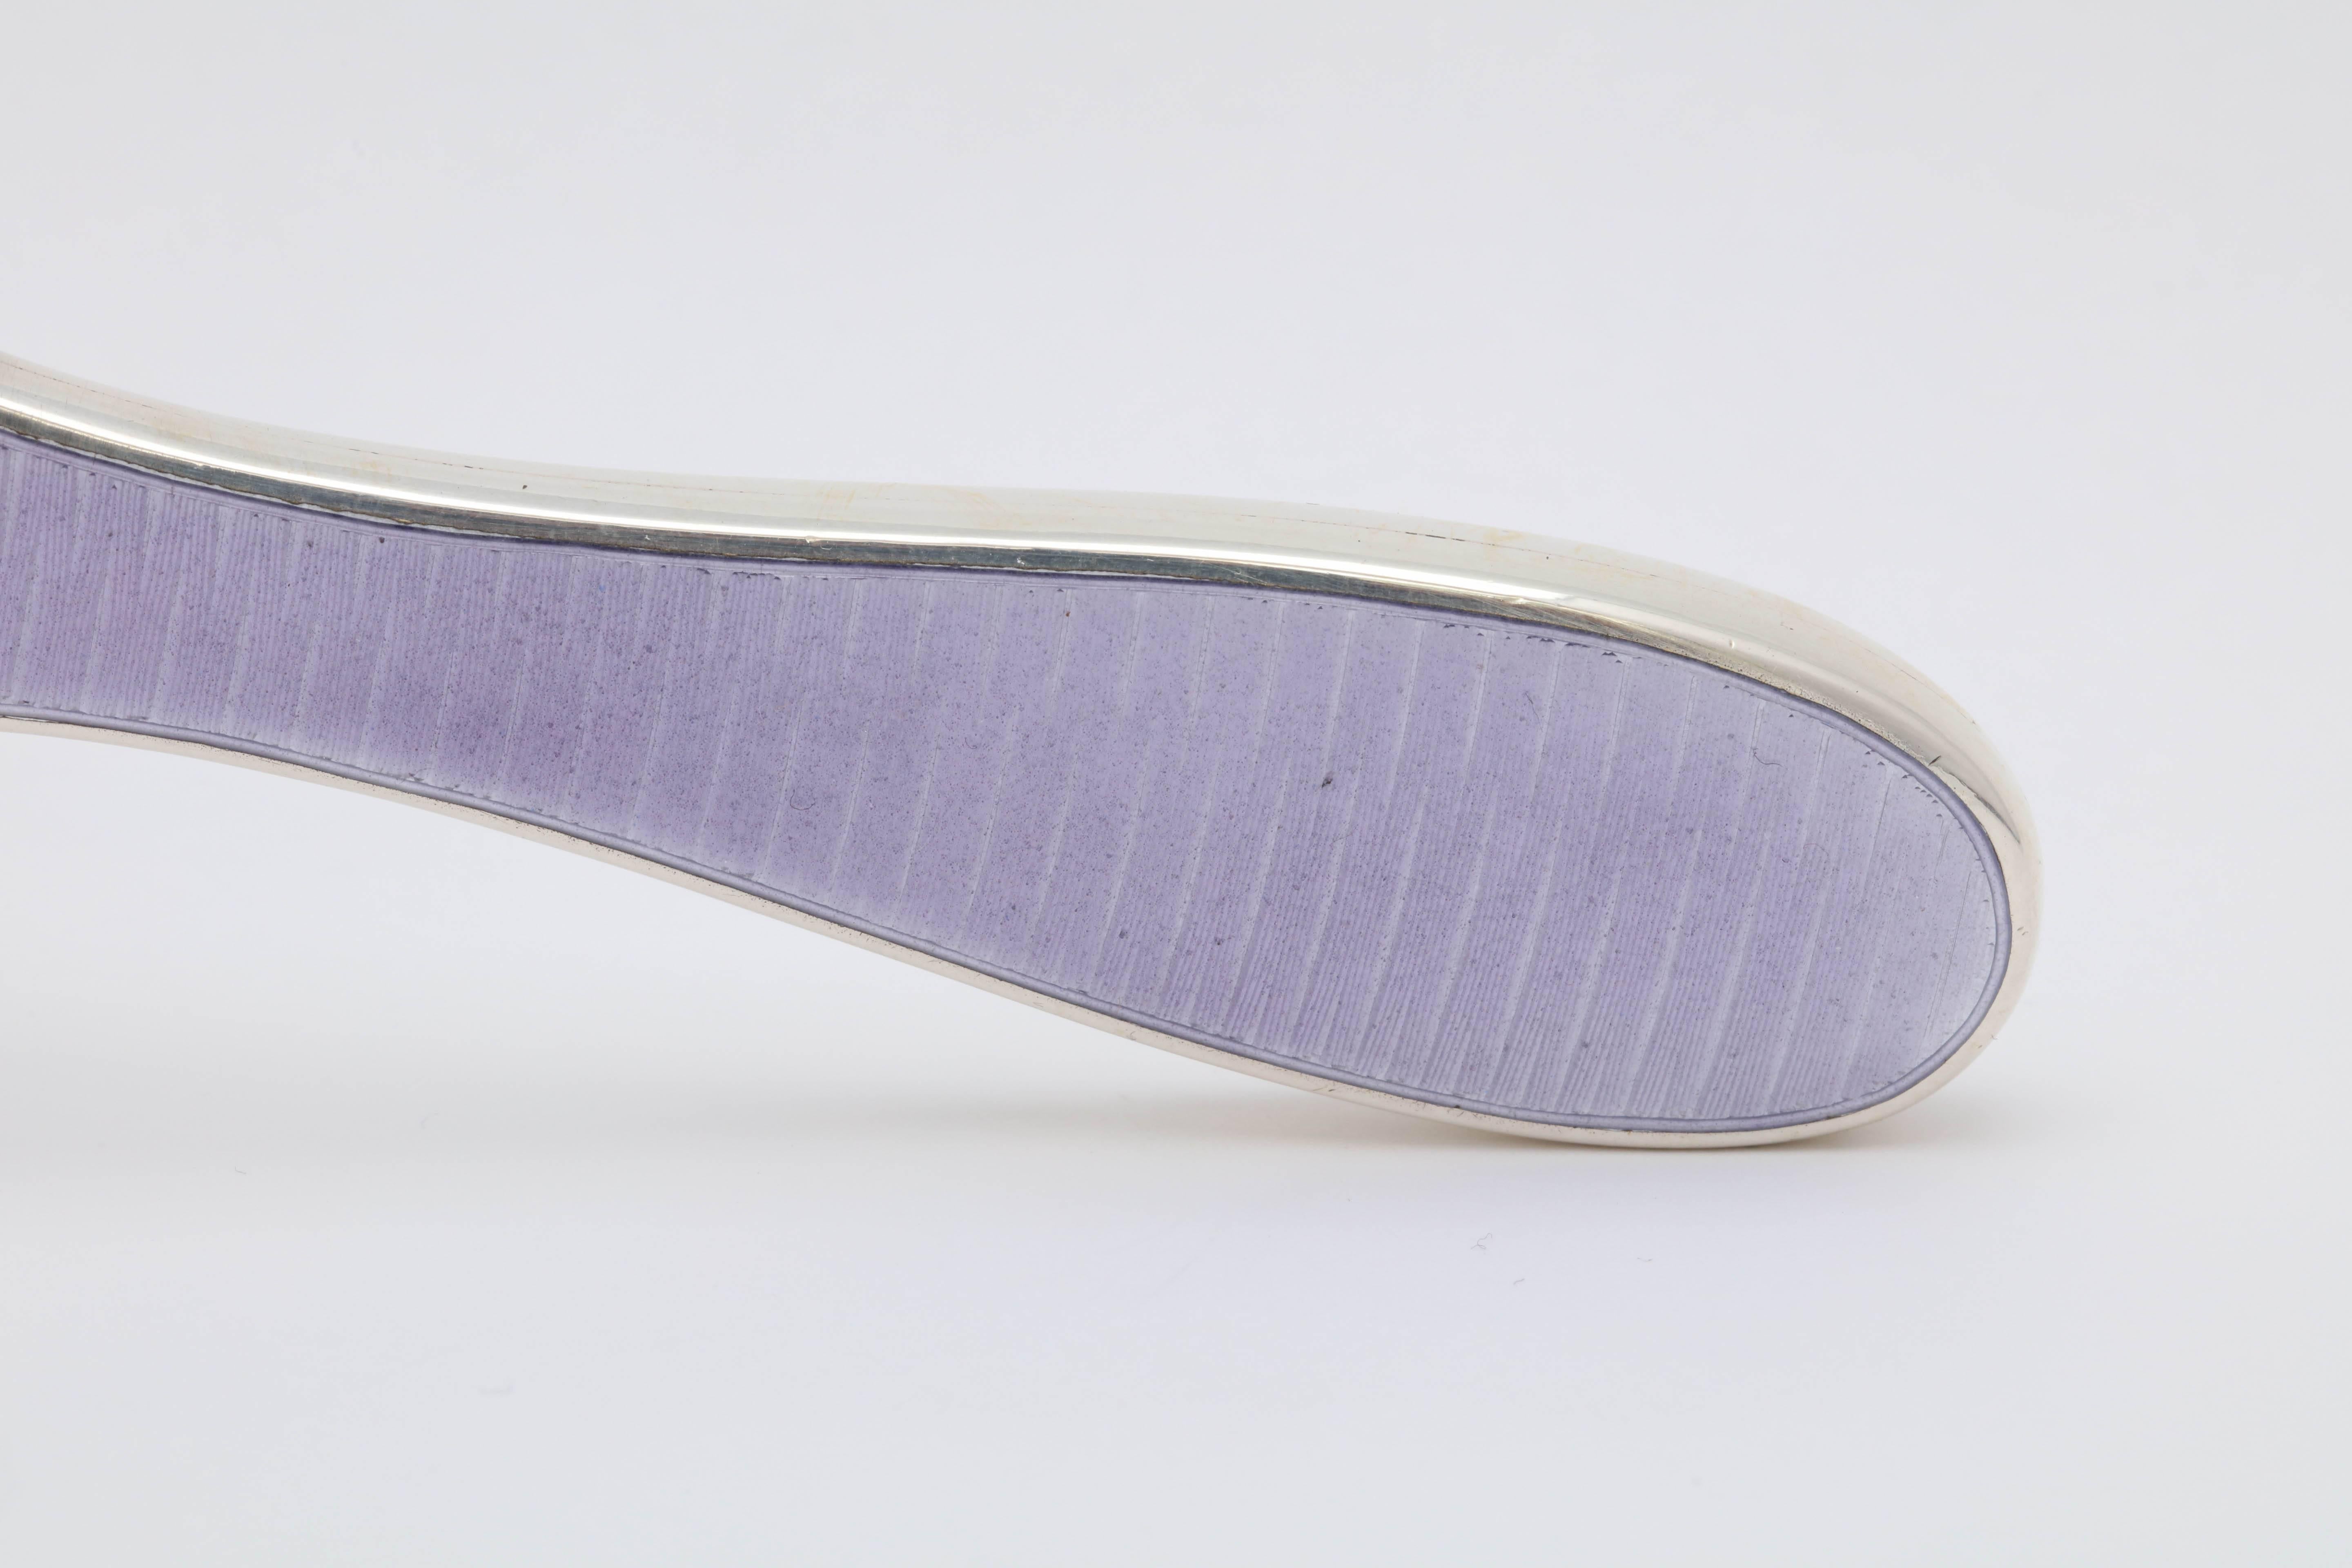 Lovely, Art Deco, sterling silver and deep lavender guilloche enamel-mounted magnifying glass, Sheffield, England, 1911, John Biggin - maker. Enamel is on one side of the sterling silver handle. Frame of glass itself is metal (for